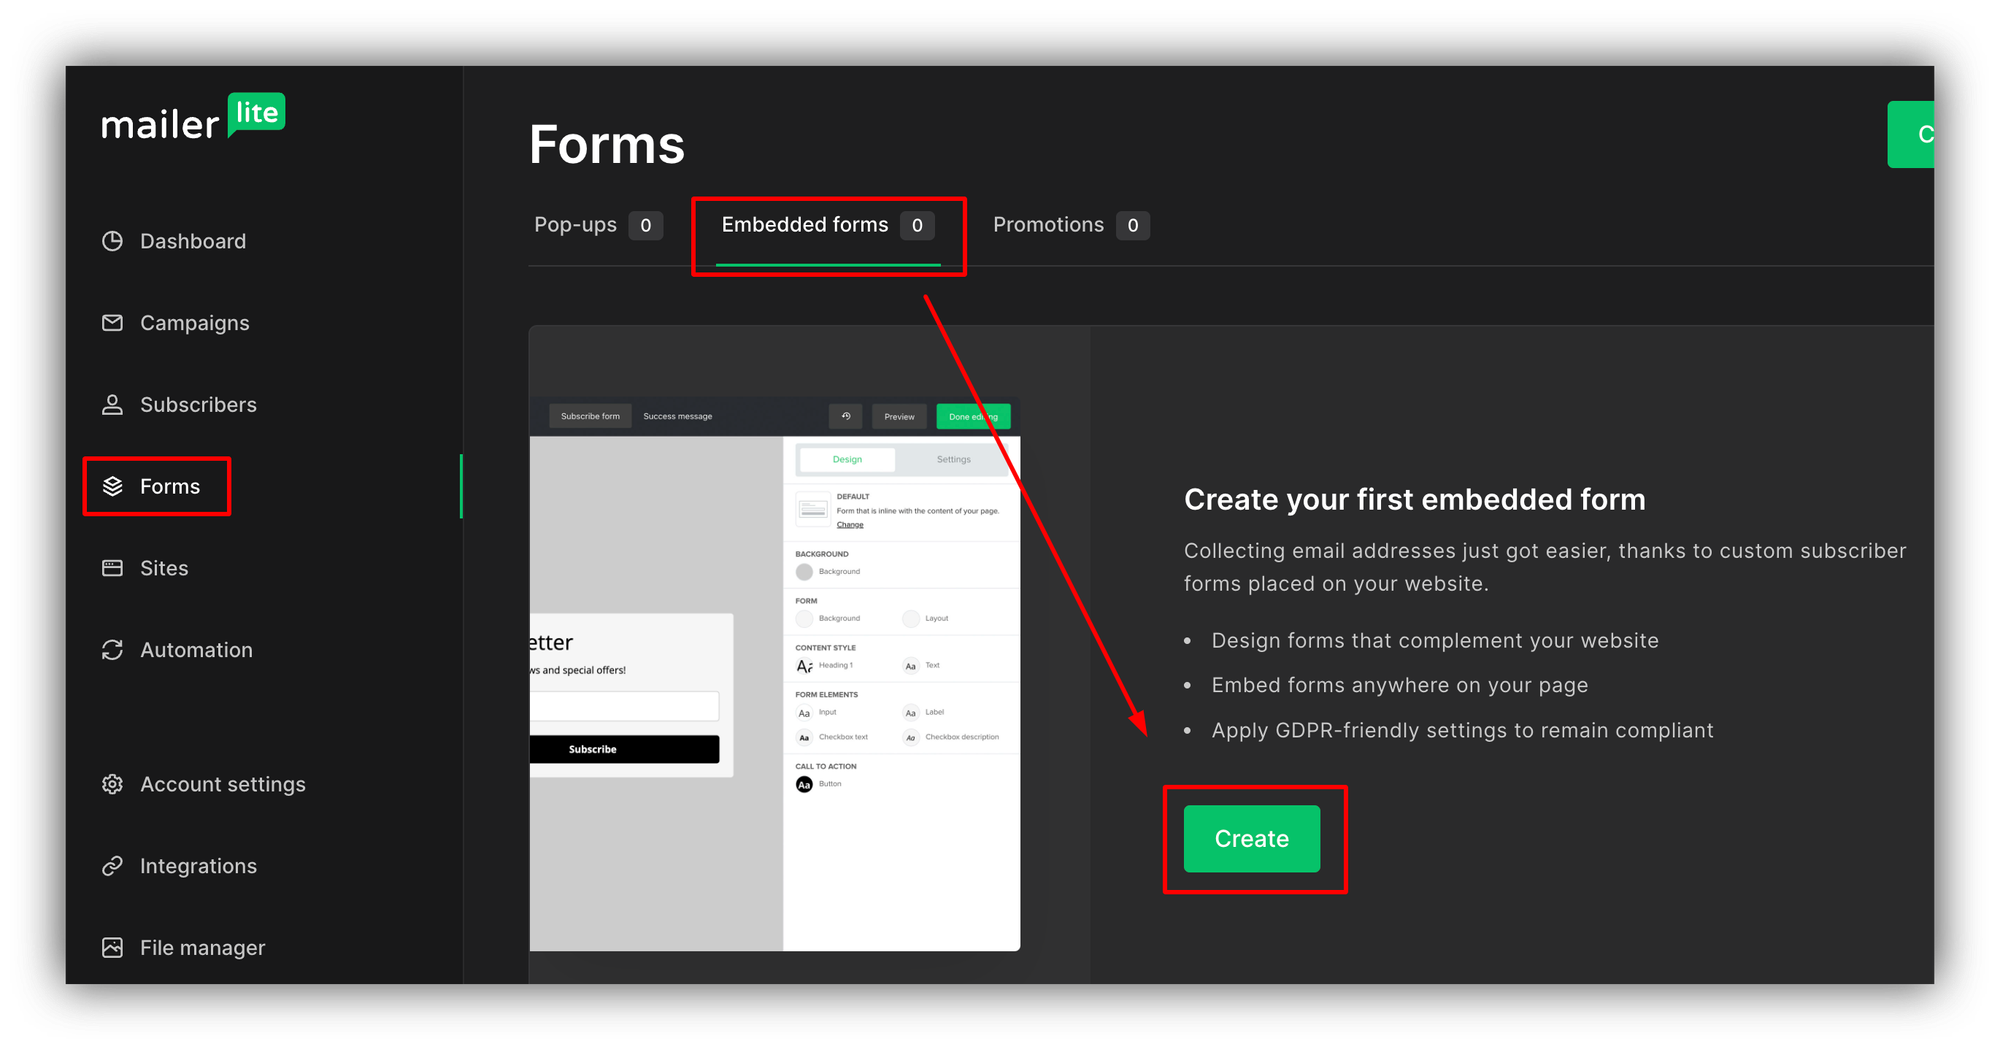 Creating an embedded form